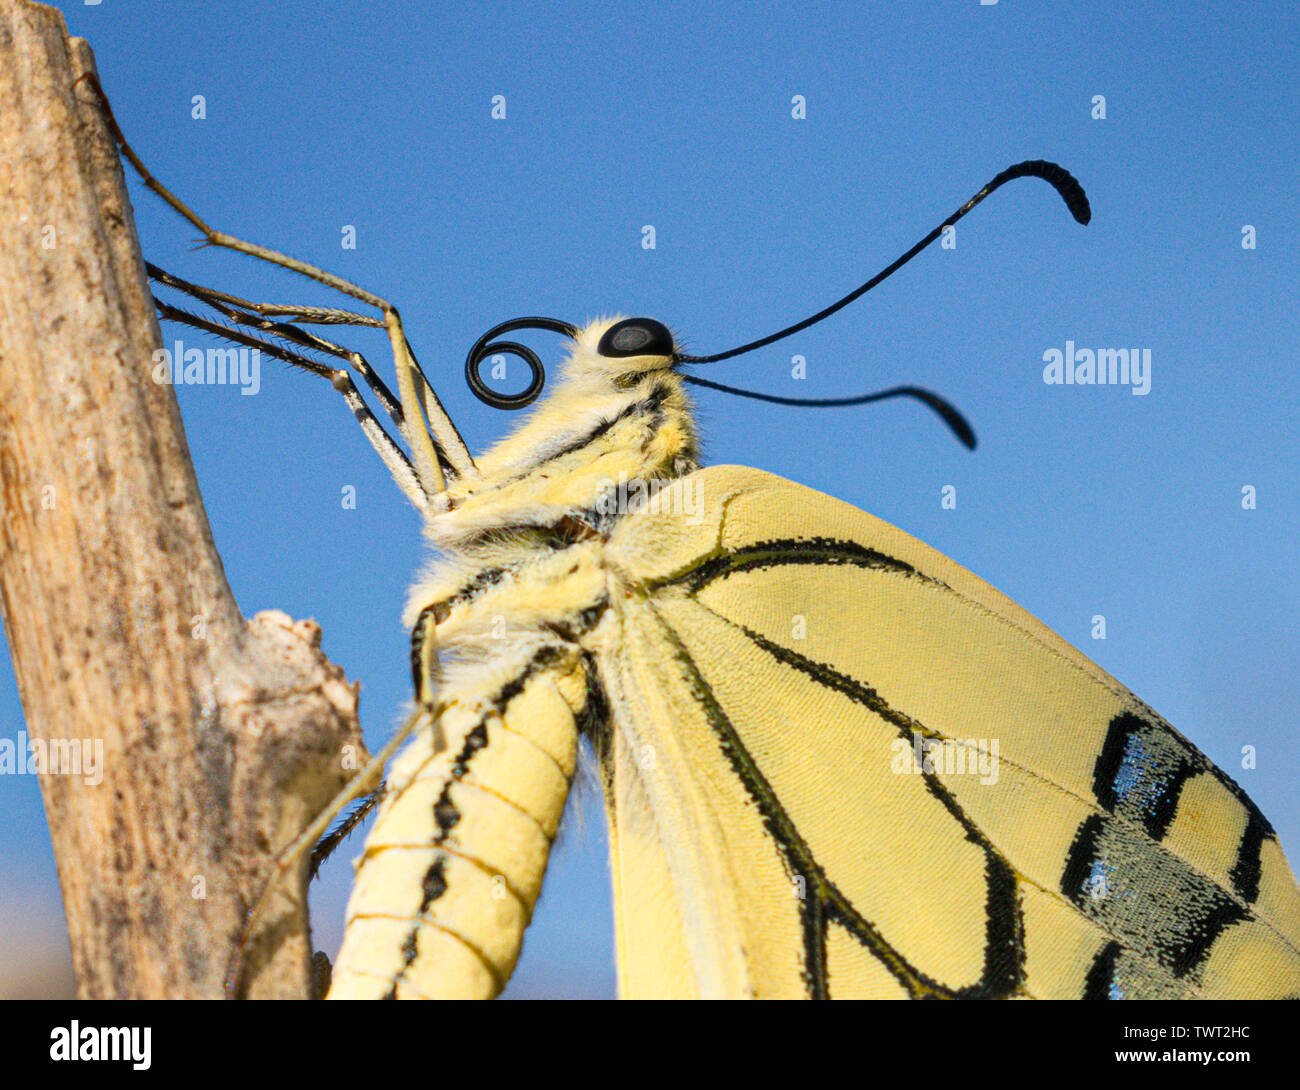 low angle closeup profile portrait of a newly emerged swallowtail butterfly clinging to a stick on a background of clear blue sky Stock Photo